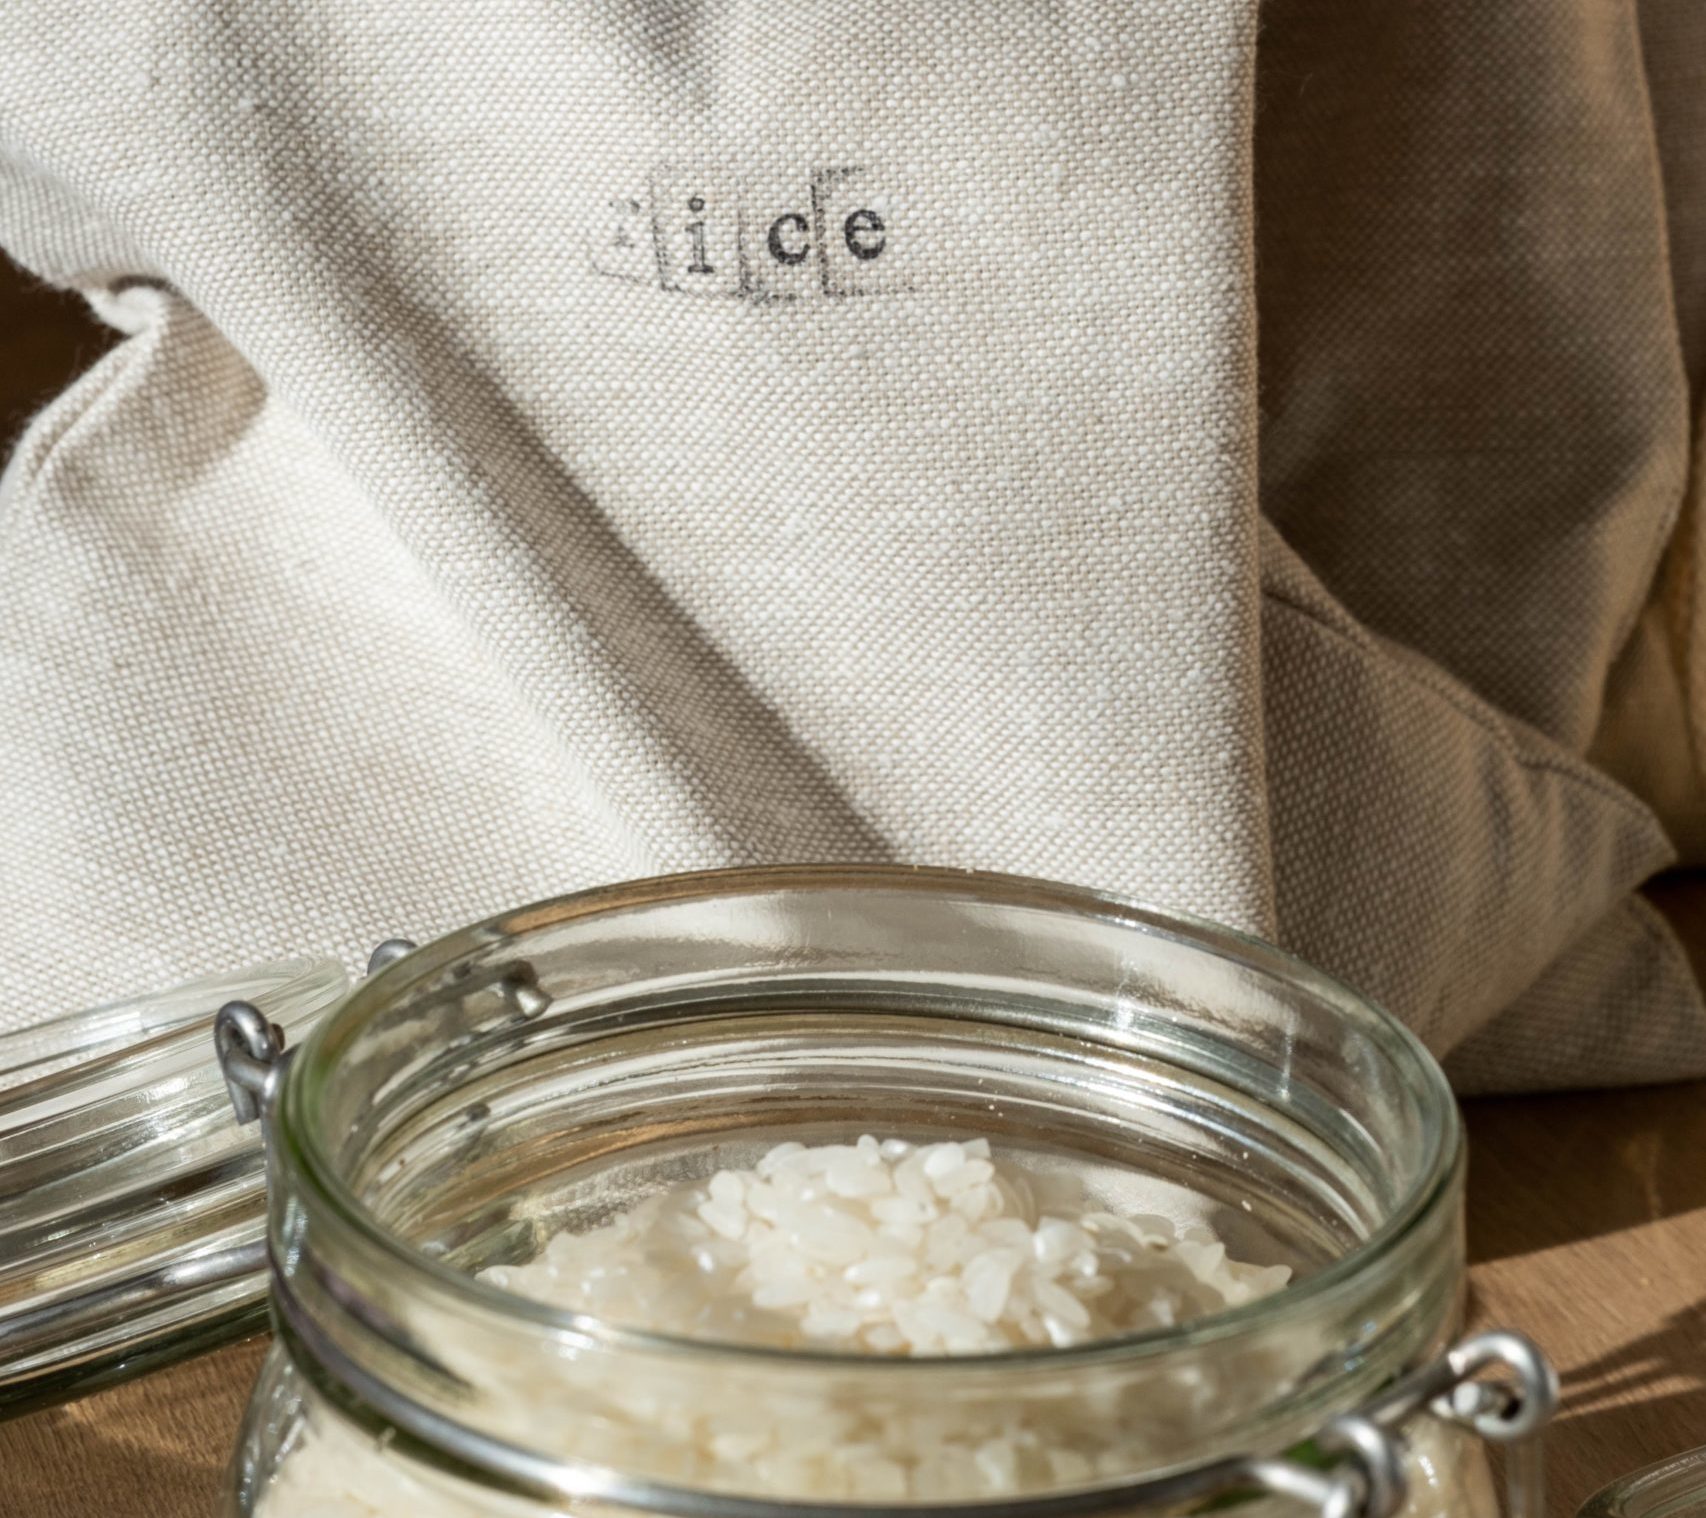 Bag of rice with label